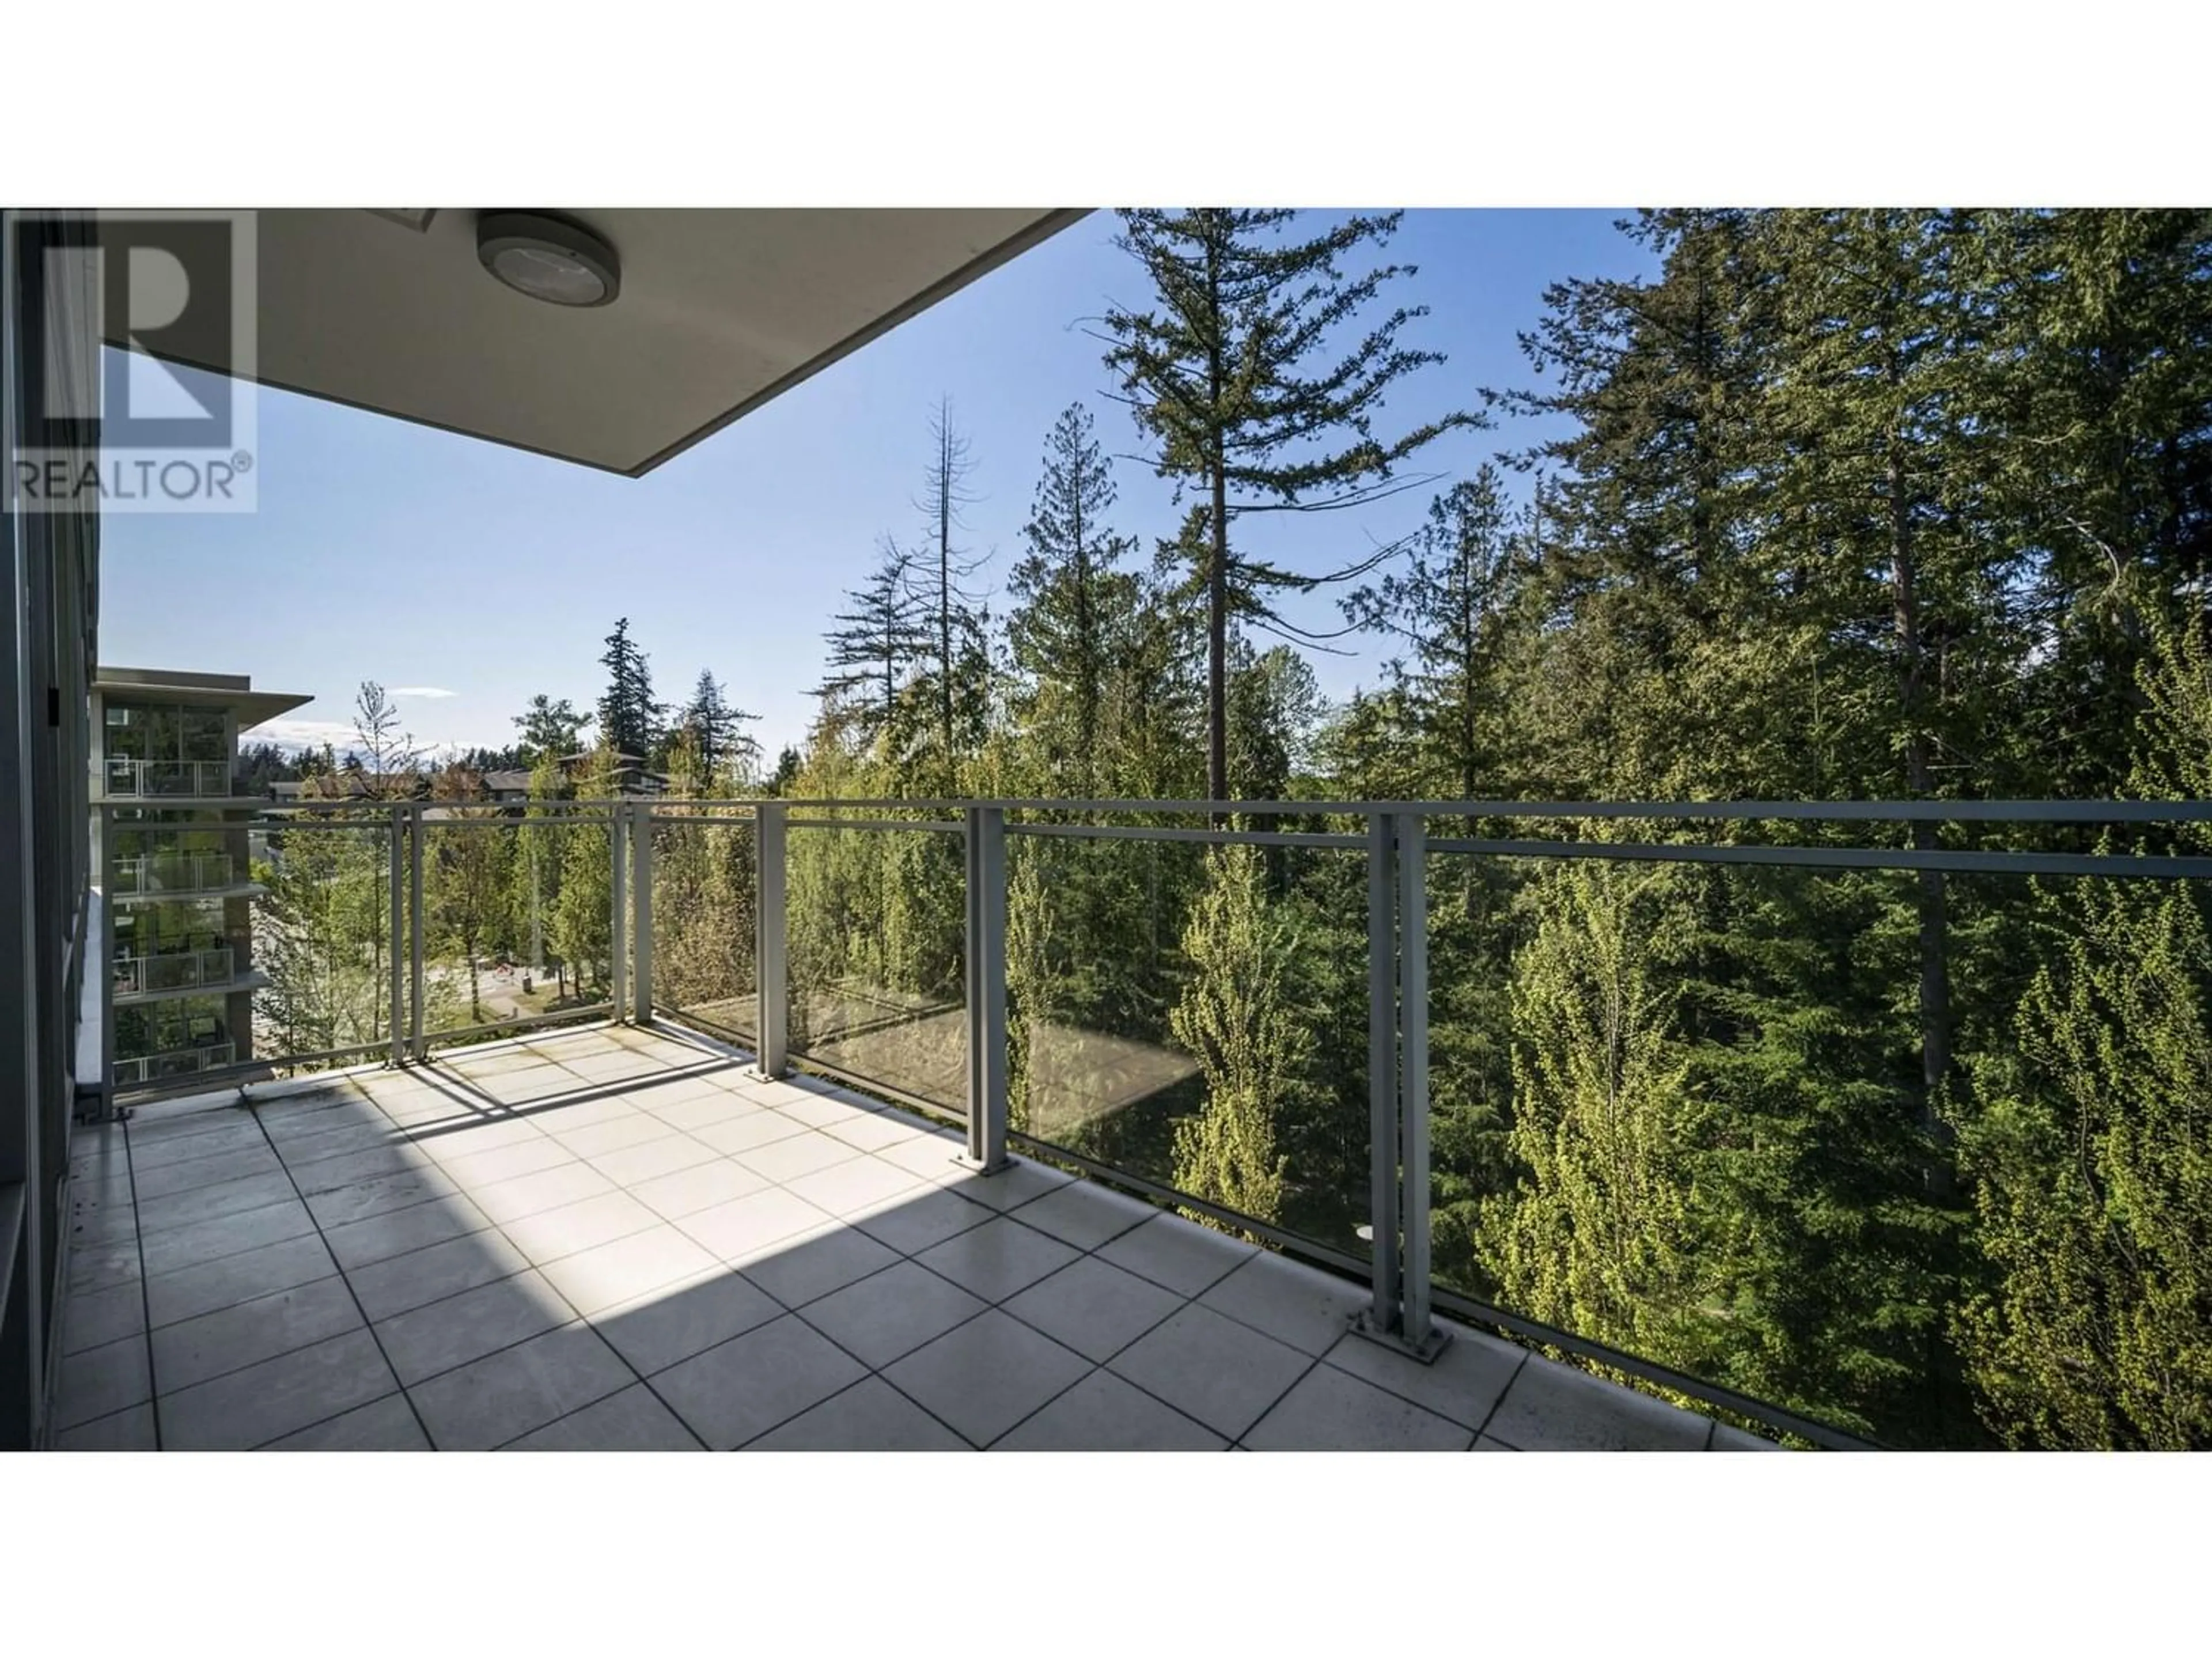 Balcony in the apartment for 604 5838 BERTON AVENUE, Vancouver British Columbia V6S0A5